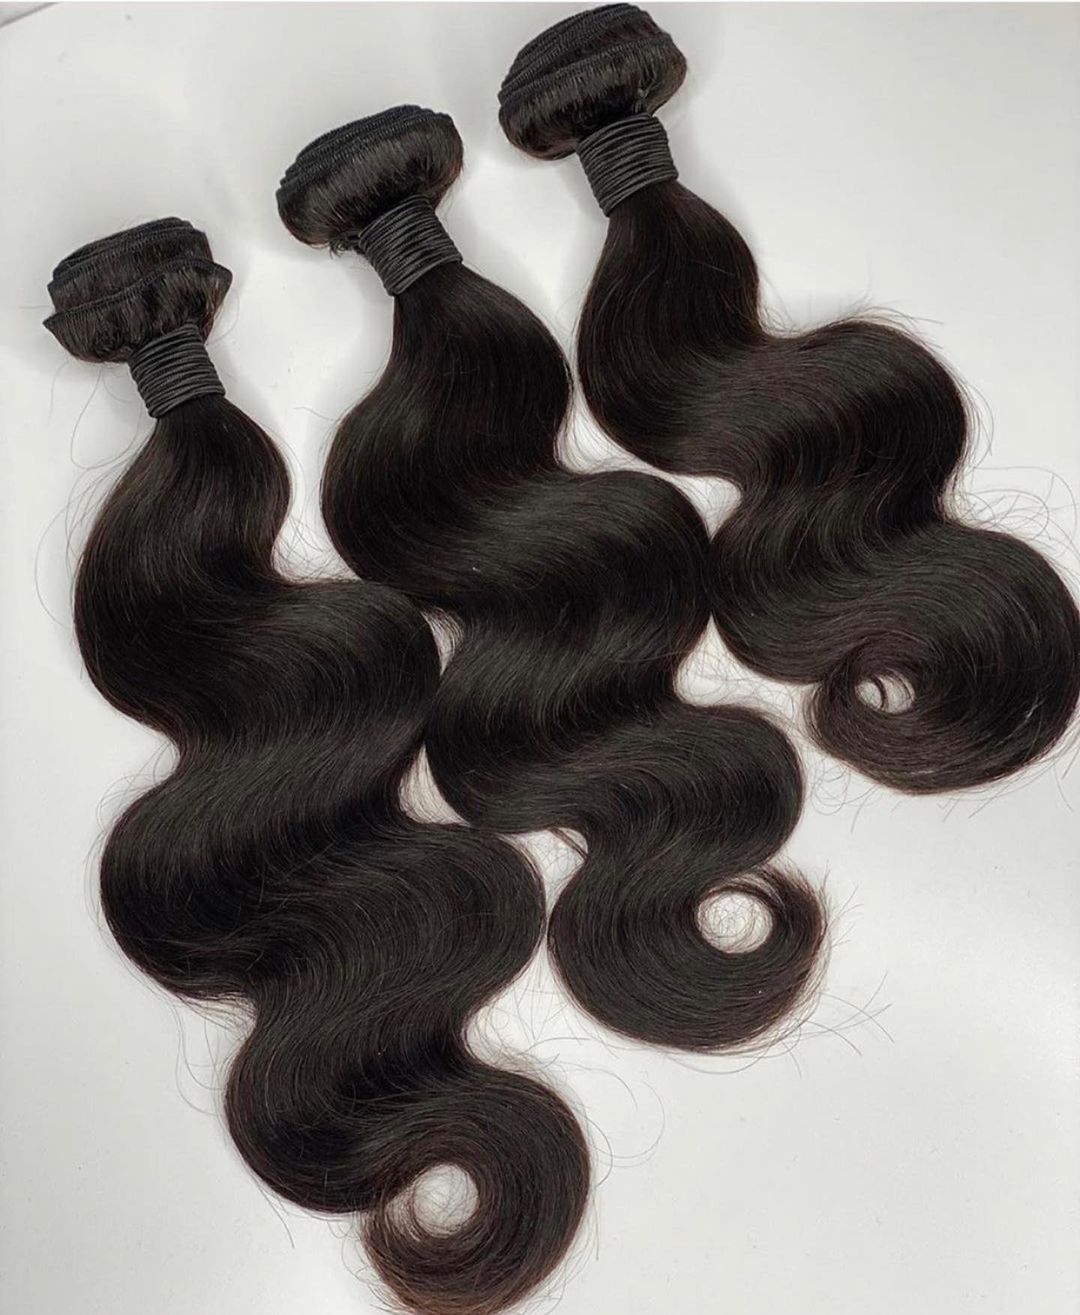 Indian Body Wave 3 Bundles With 13×4 Lace Frontal 10A Grade 100% Human Virgin Hair Bling Hair